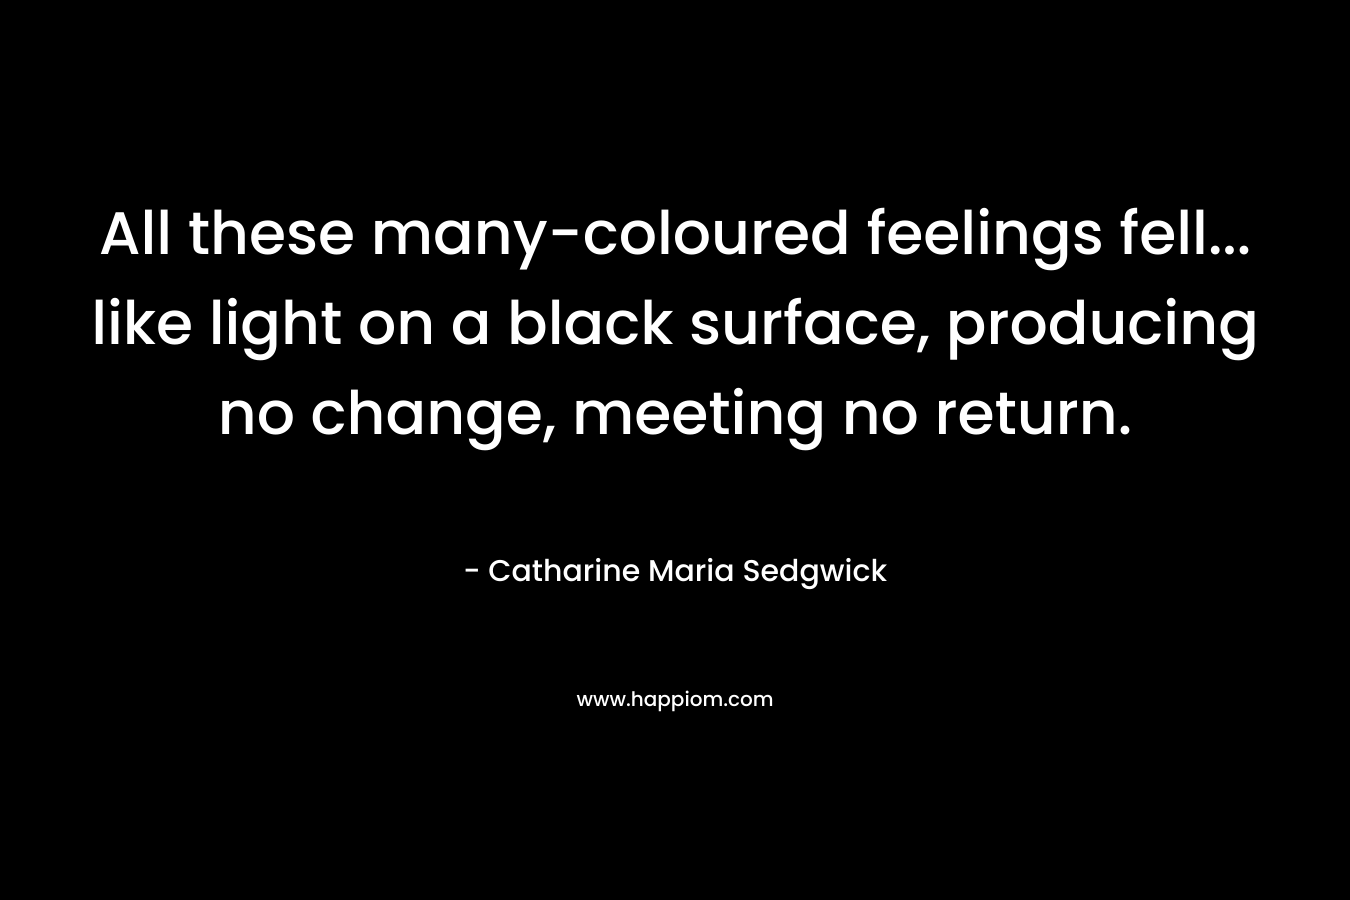 All these many-coloured feelings fell... like light on a black surface, producing no change, meeting no return.